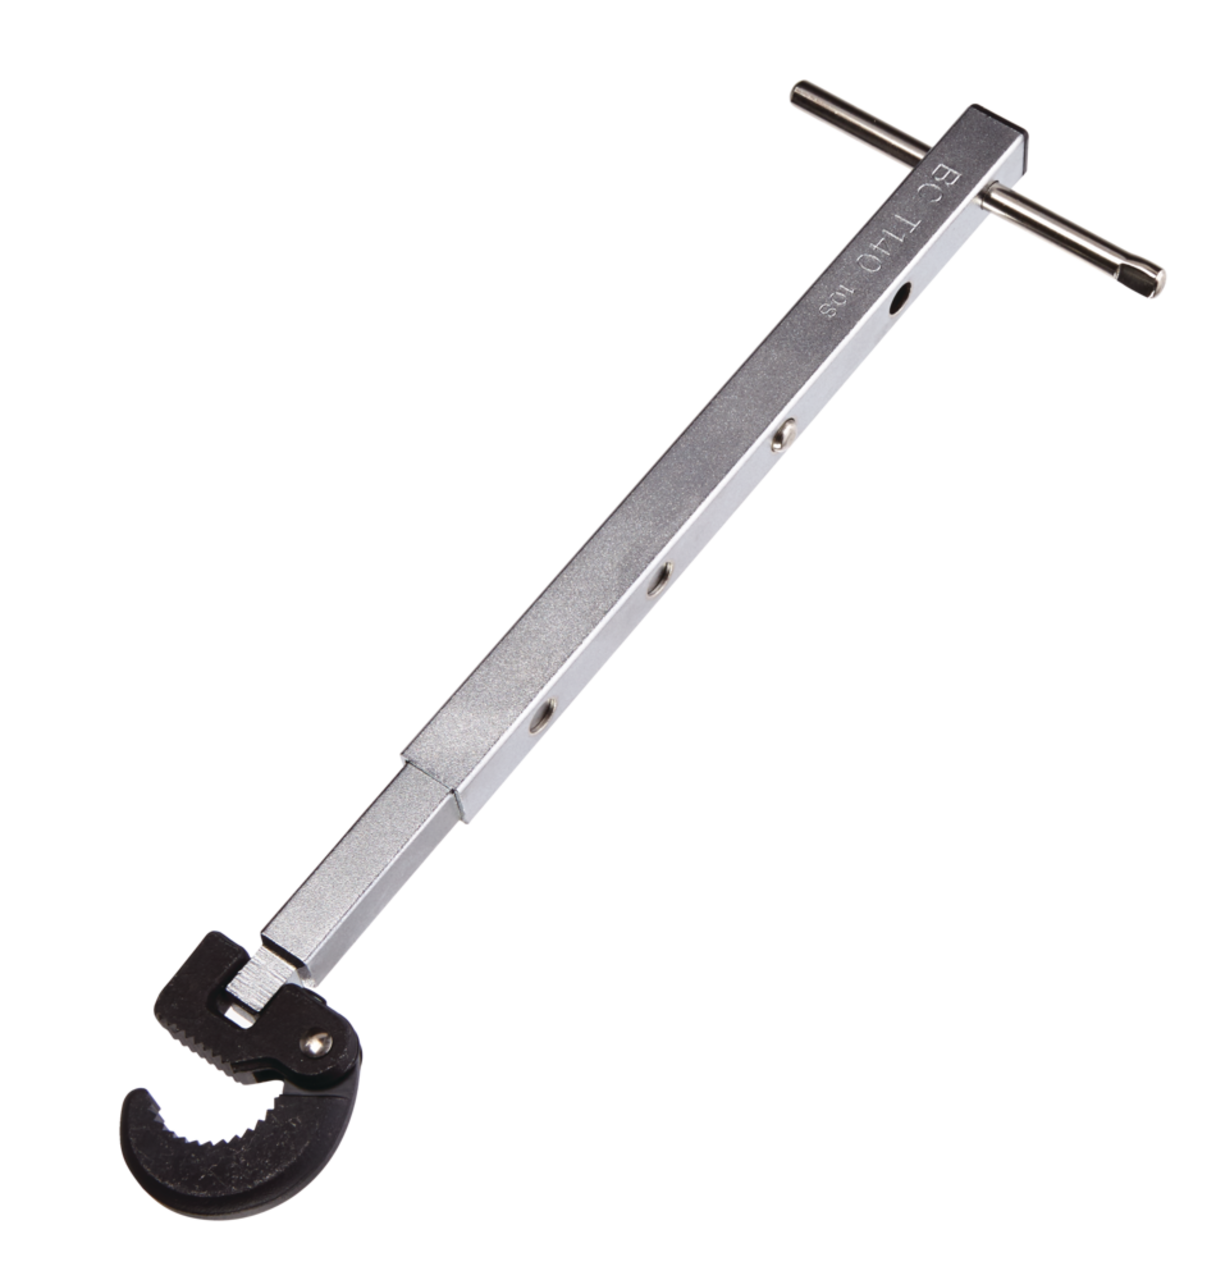 https://media-www.canadiantire.ca/product/fixing/plumbing/rough-plumbing/0638911/basin-wrench-telescoping-d8be7622-cb57-4cd2-899b-8a09afd80586.png?imdensity=1&imwidth=640&impolicy=mZoom